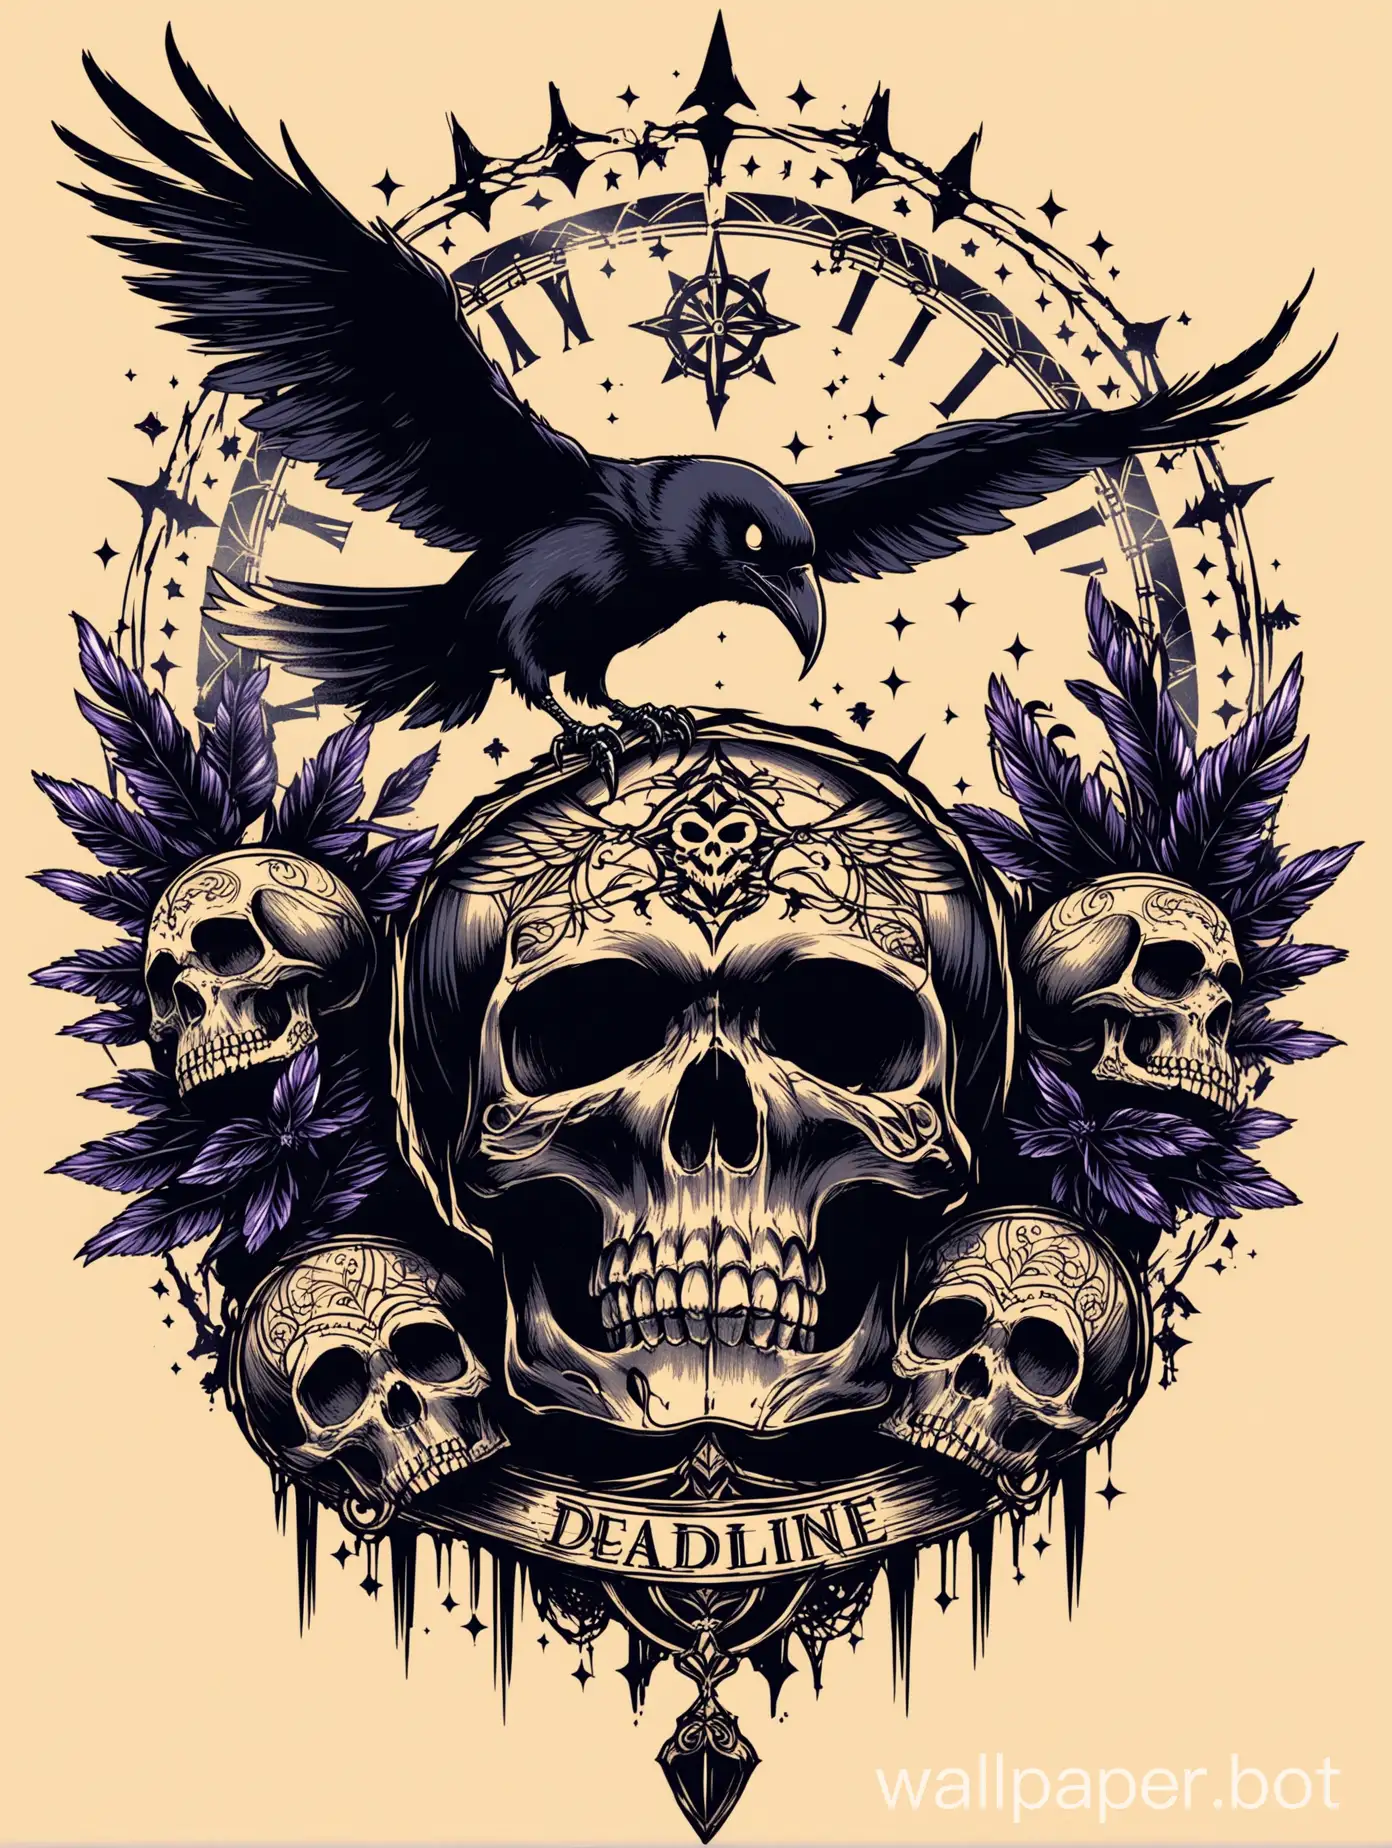 Gothic-Tattoo-Design-with-Skull-and-Raven-Dark-Ornamental-Art-for-Edgy-Souls